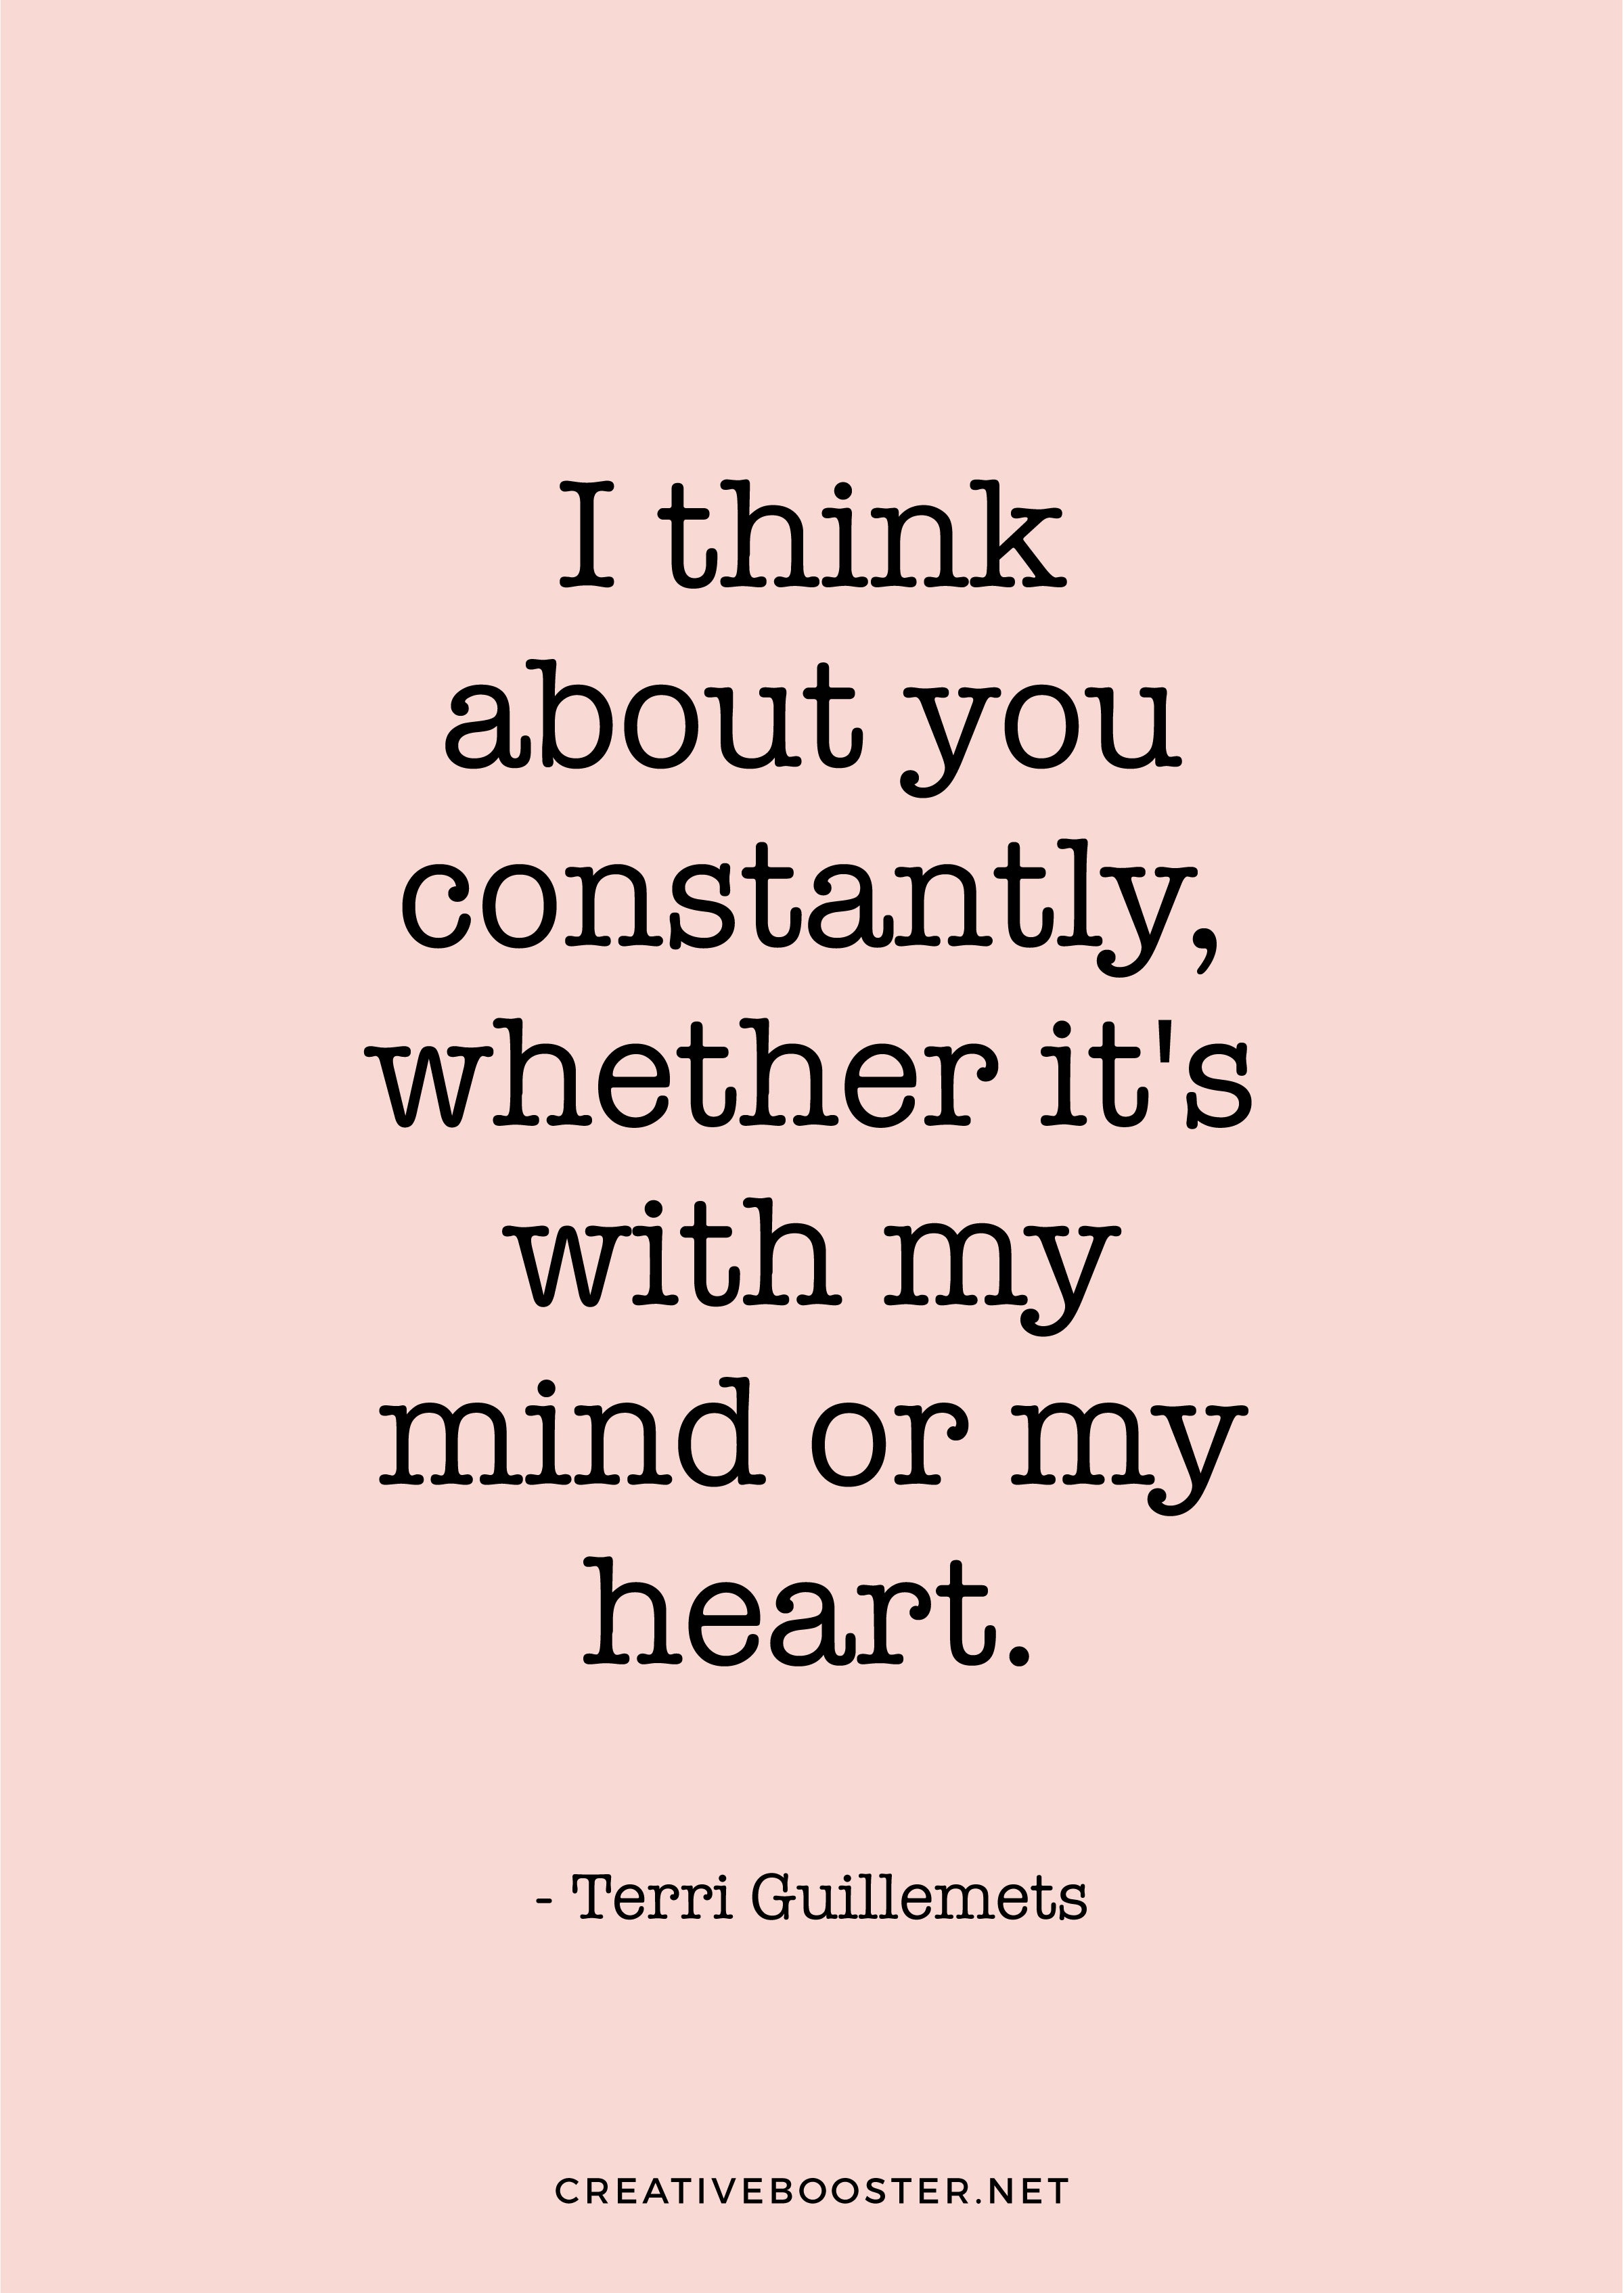 "I think about you constantly, whether it's with my mind or my heart." — Terri Guillemets